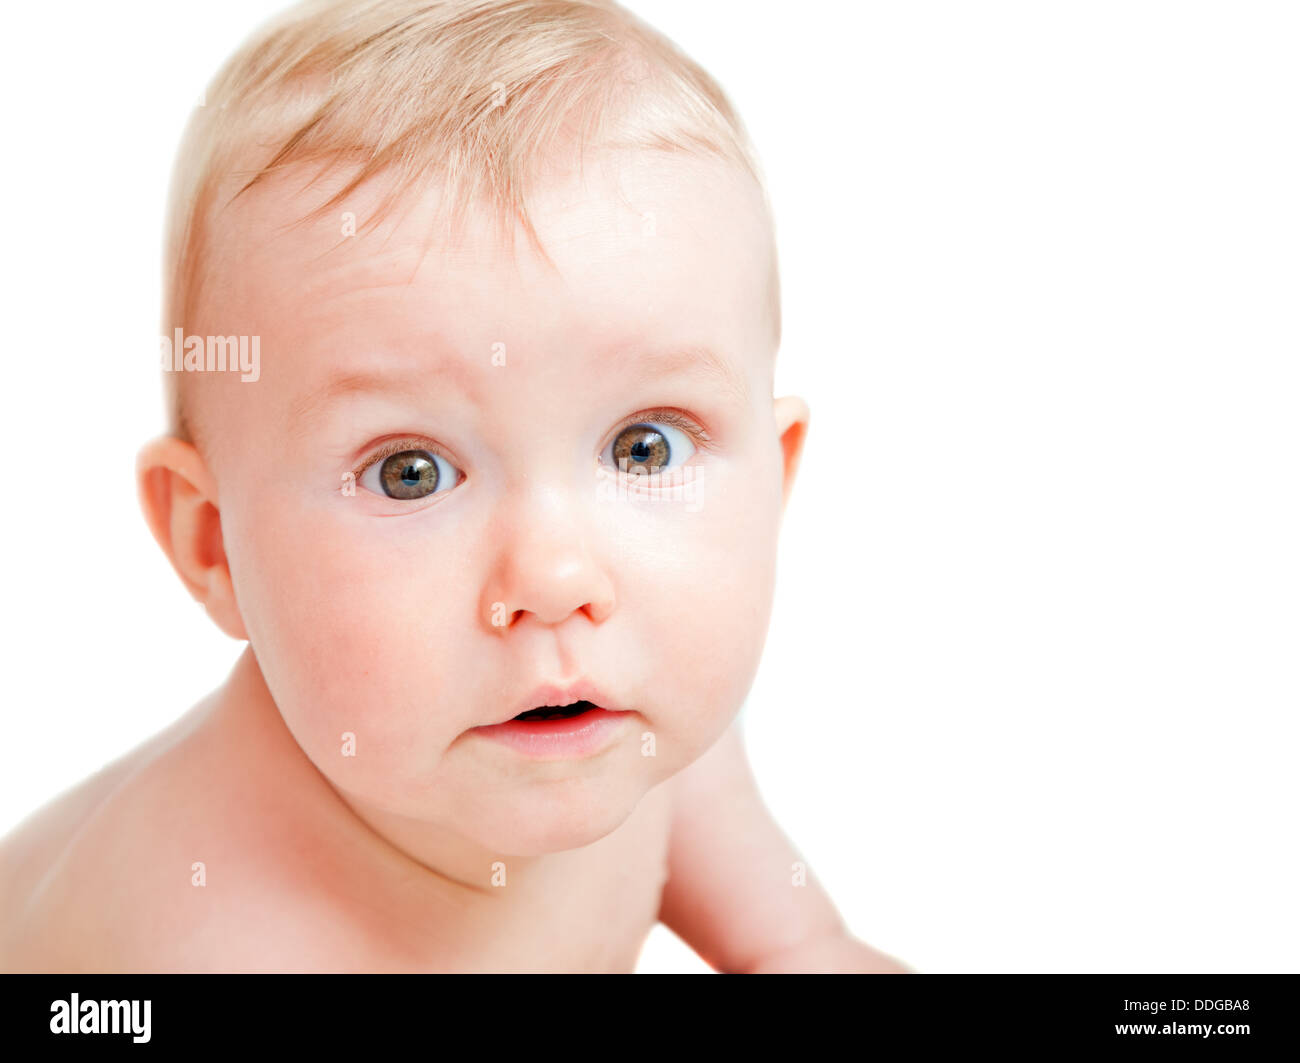 Cute baby with surprised face expression looking at the camera Stock Photo